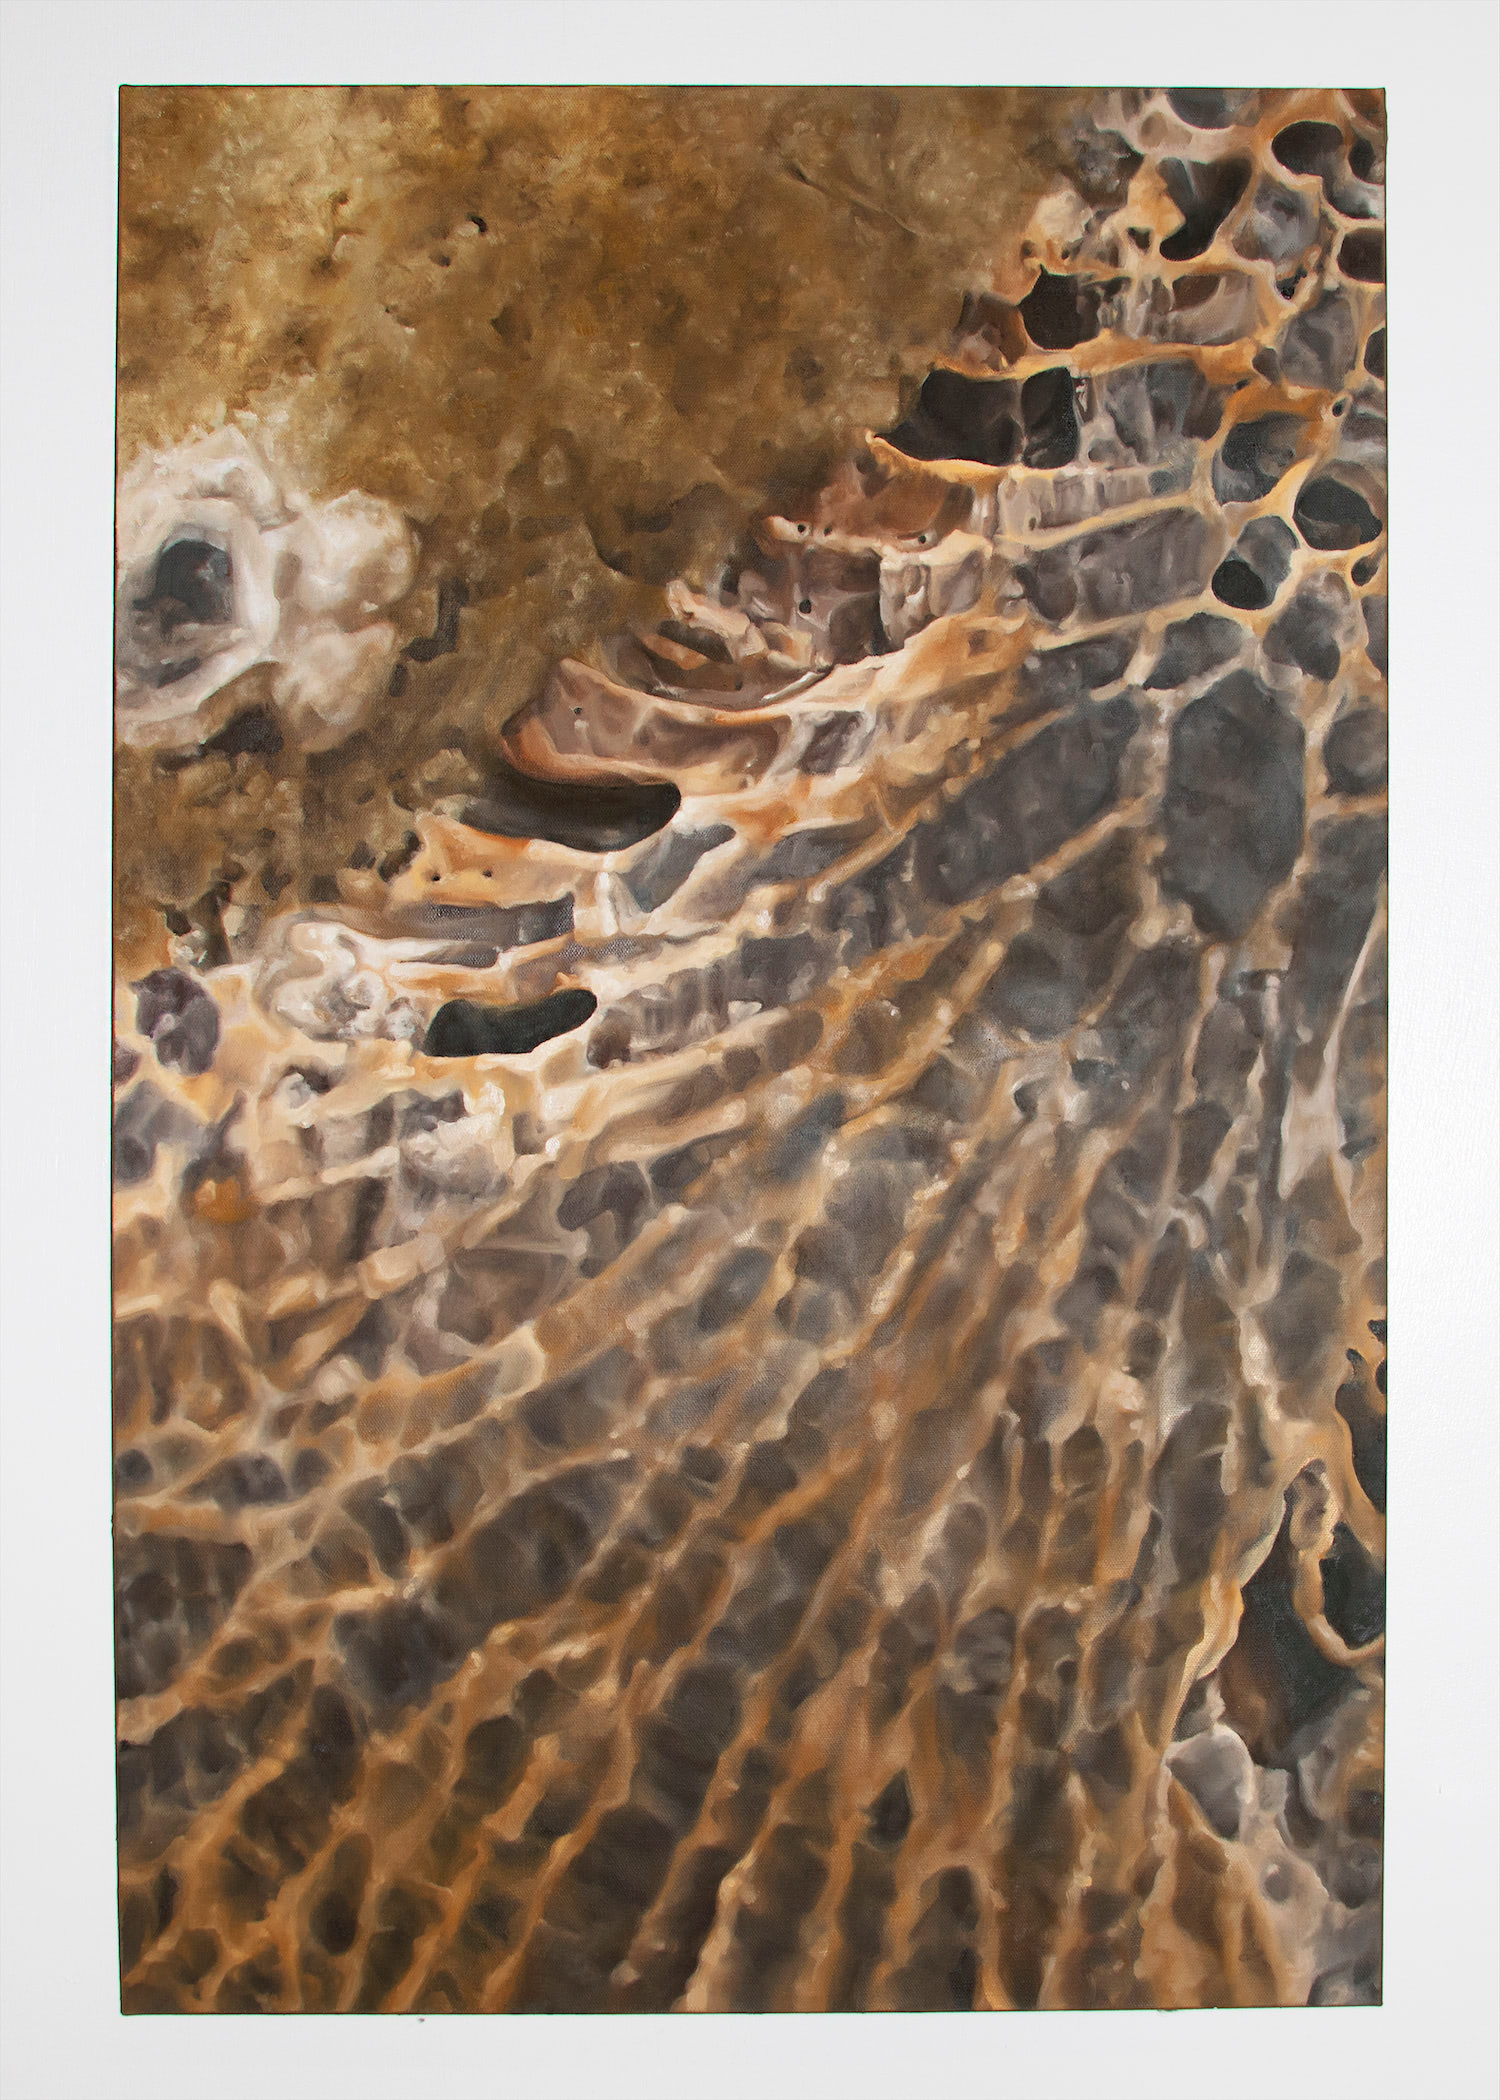 A web-like coral fossil called Favosite painted on a vertical rectangular canvas. The structure is almost cellular, with cool toned grey colored cells and a warm, orange-toned structure.